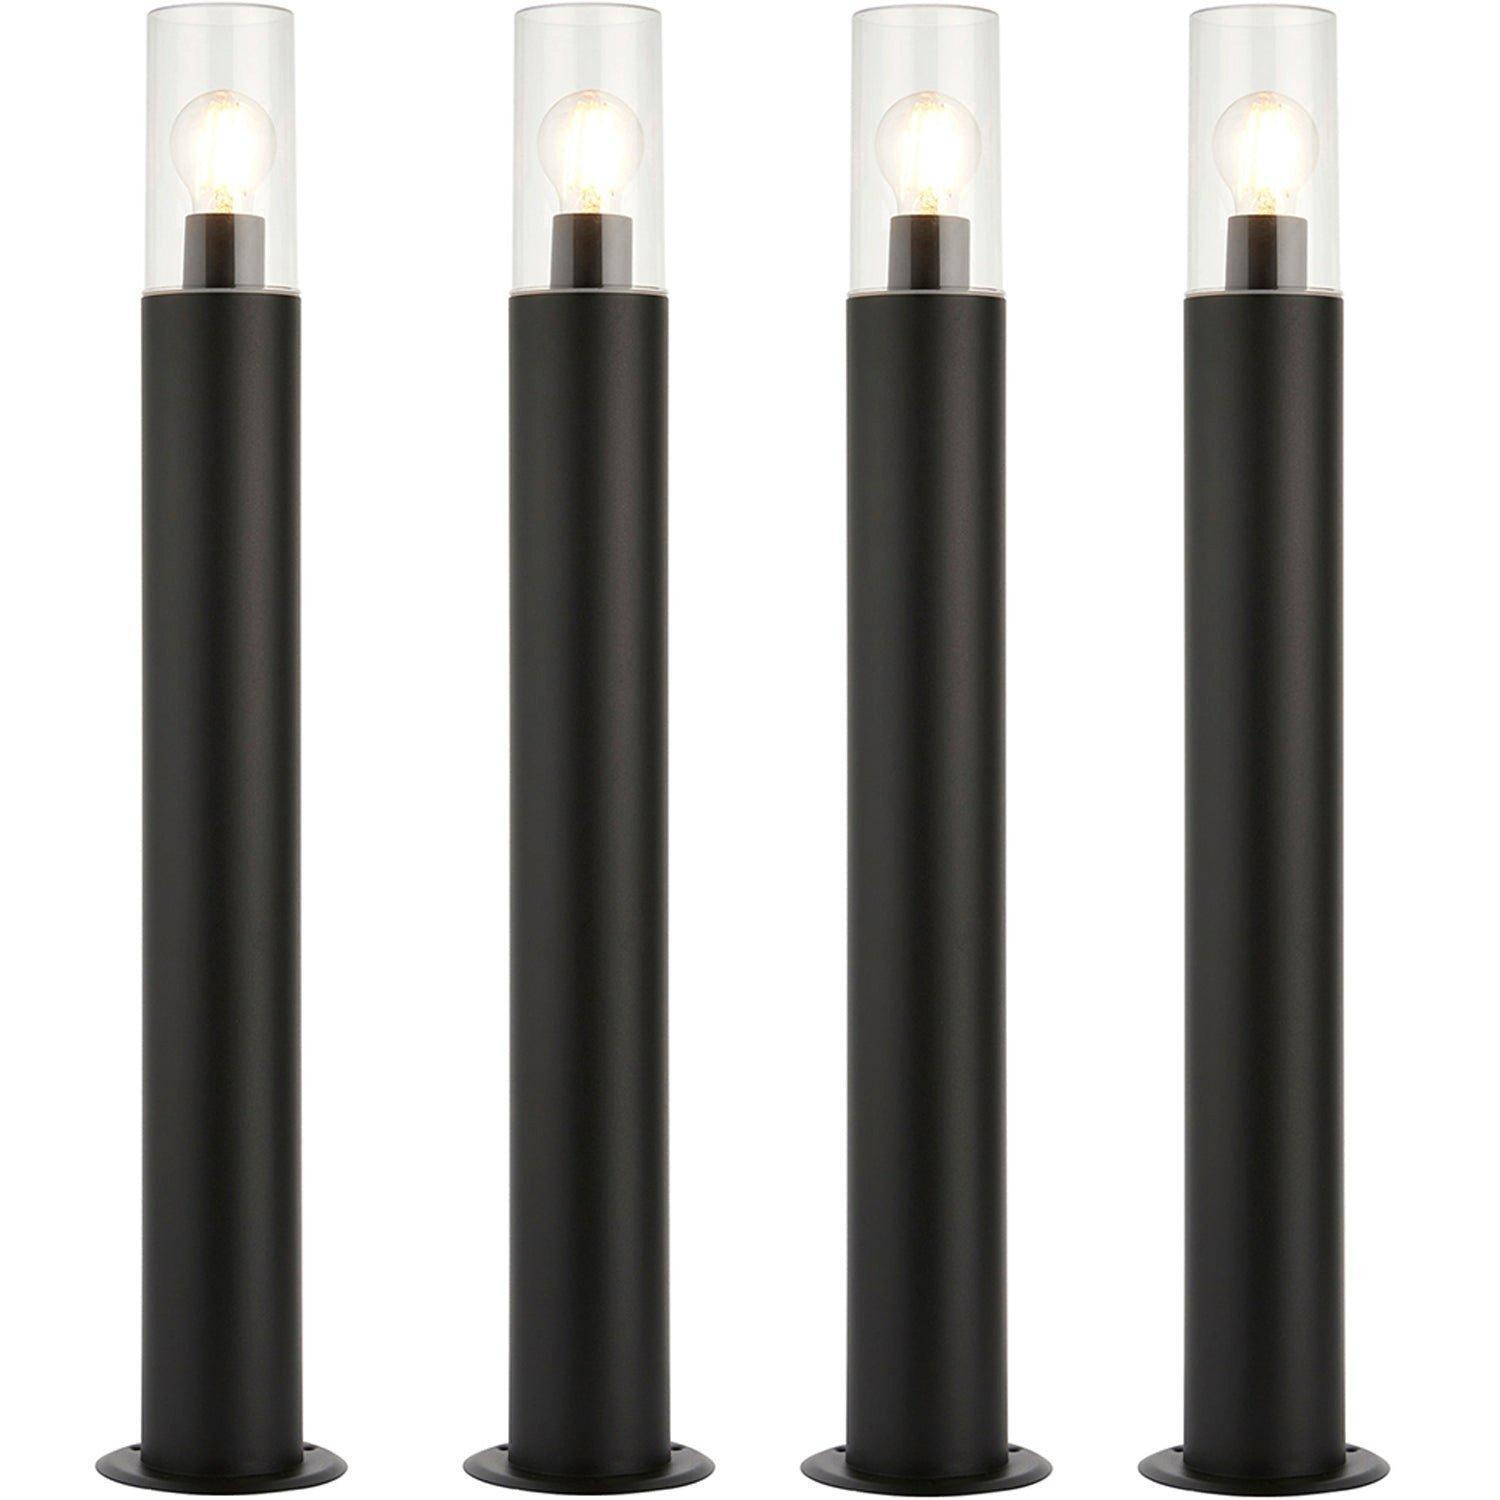 4 PACK Outdoor Bollard Post Light - 15W E27 LED - 800mm Height - Stainless Steel - image 1